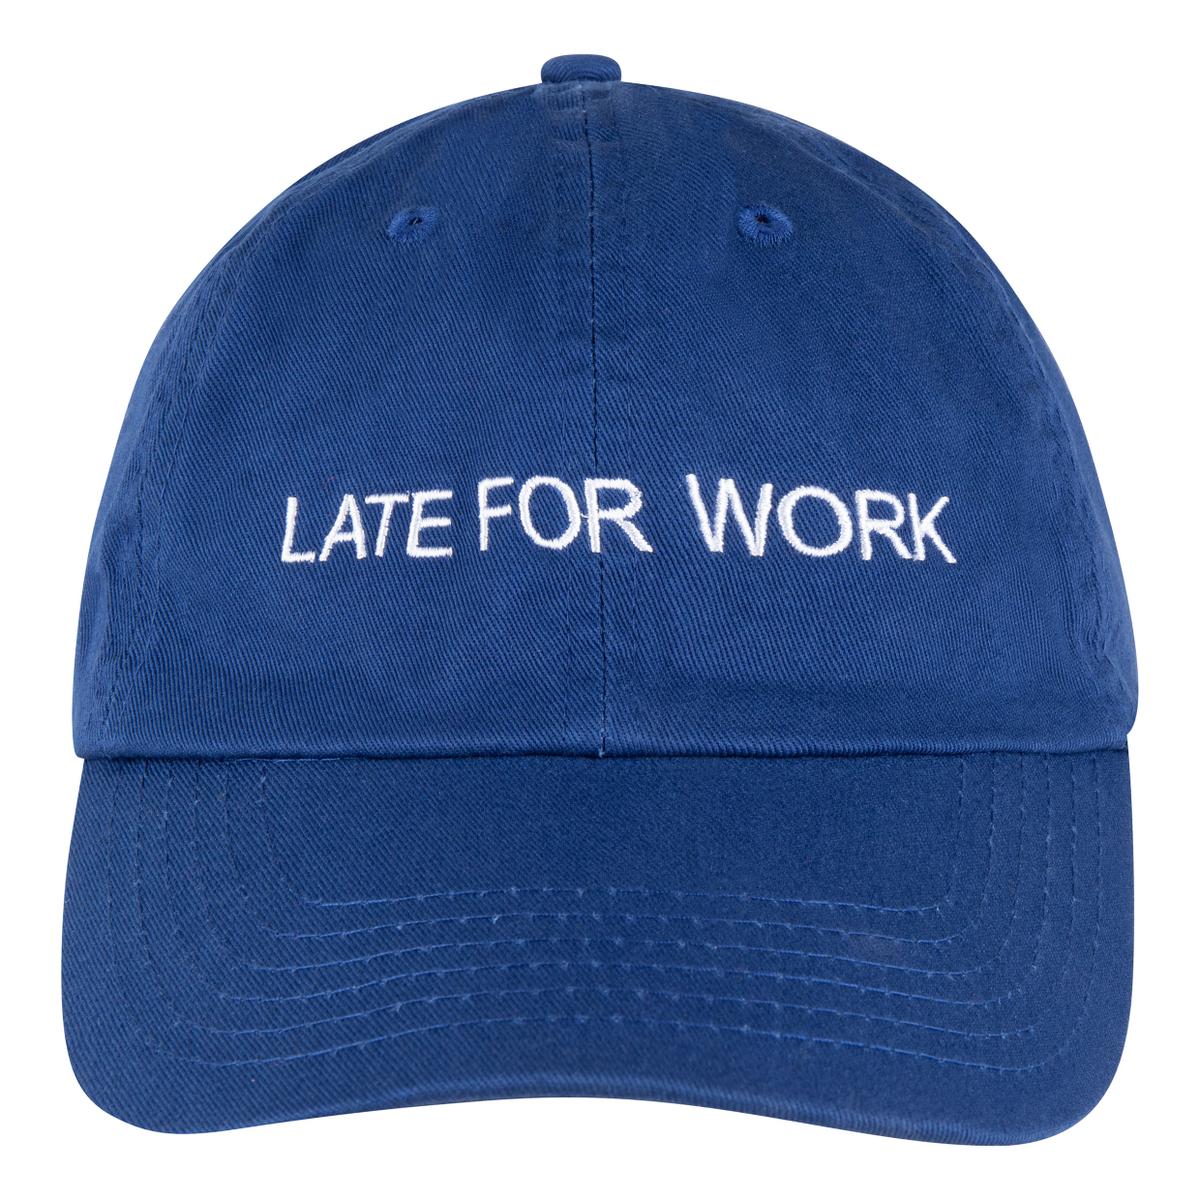 Love stories Cap Late For Work